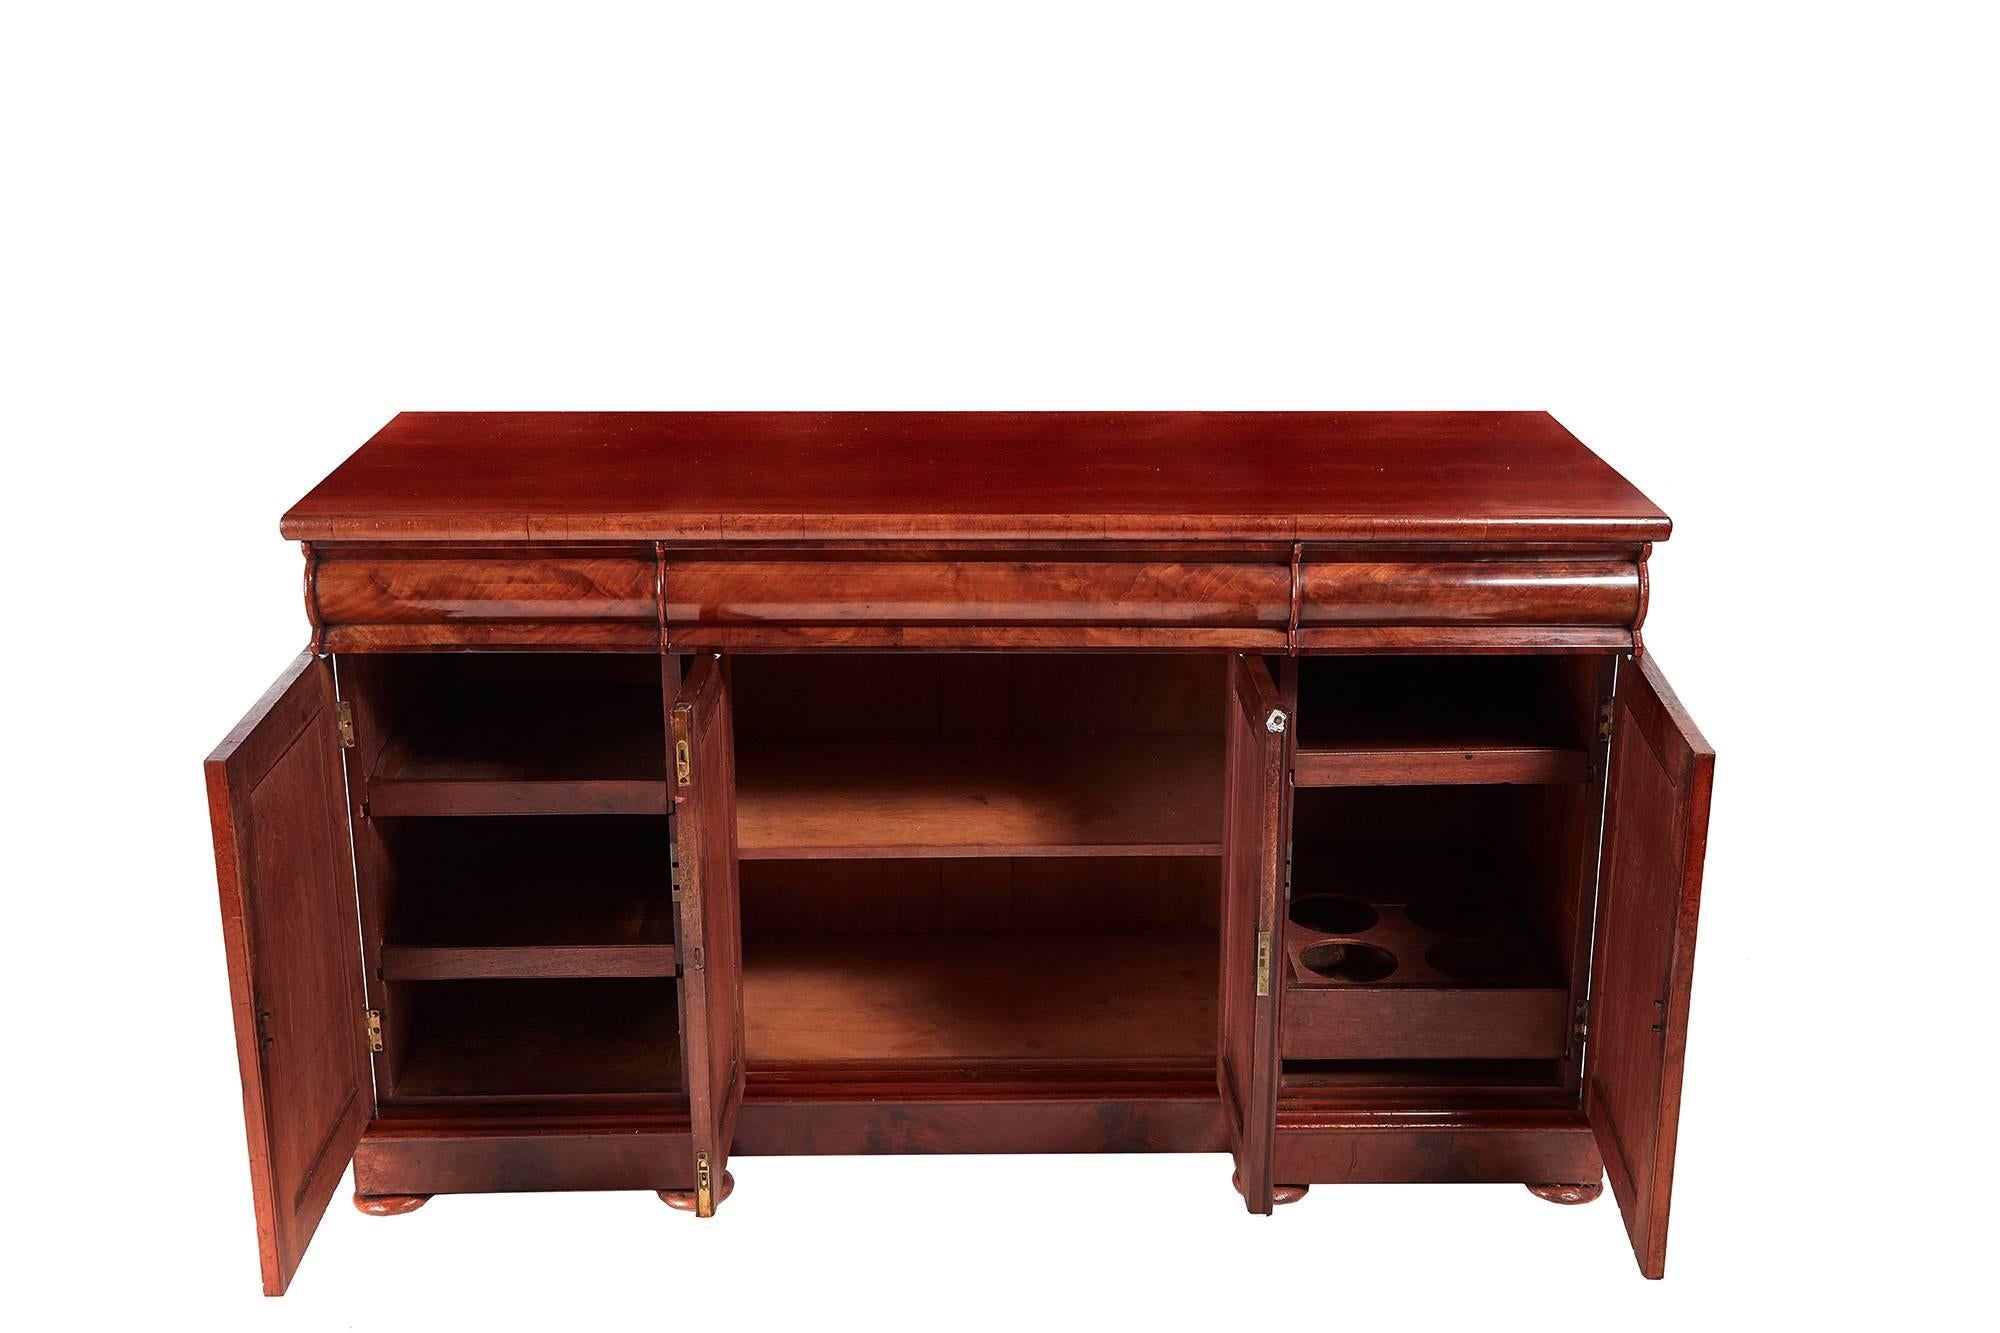 Quality Victorian mahogany sideboard, with a lovely mahogany top, three shaped frieze drawers, four lovely figured mahogany panelled doors, fitted interior, standing on a plinth base with original bun feet
Lovely color and condition
Measures: 60